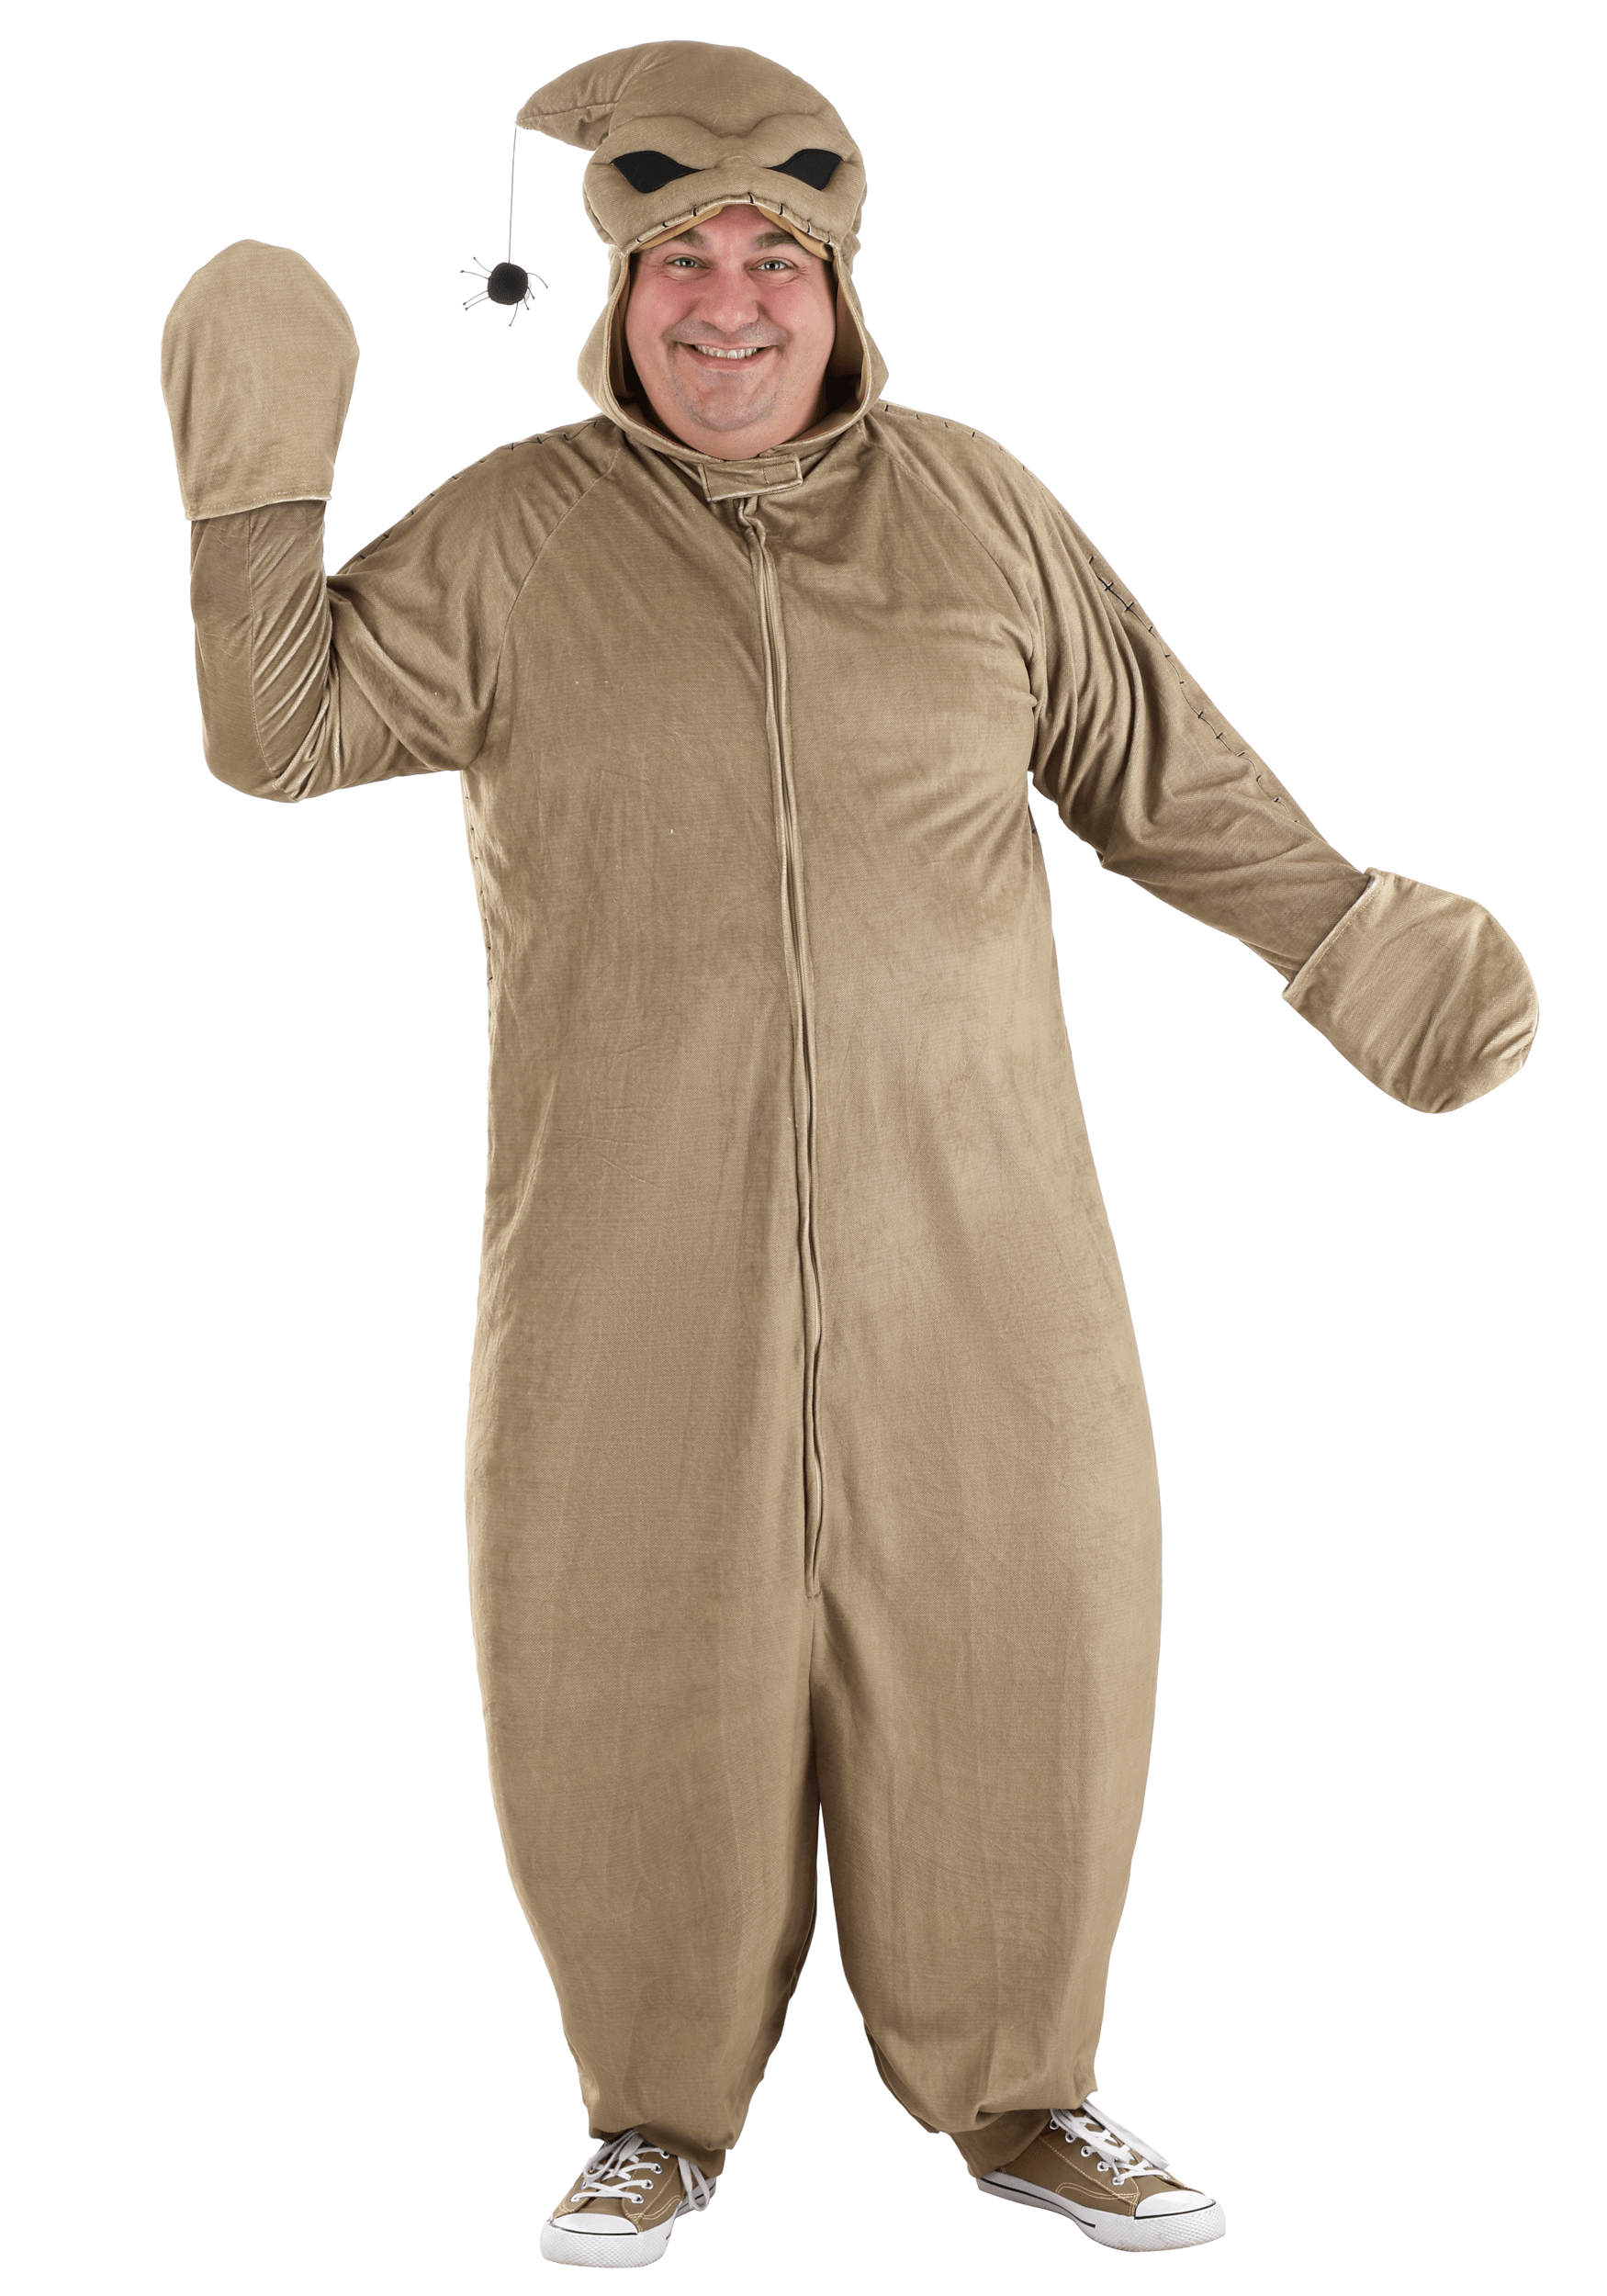 Image of FUN Costumes Plus Size Nightmare Before Christmas Oogie Boogie Costume for Adults